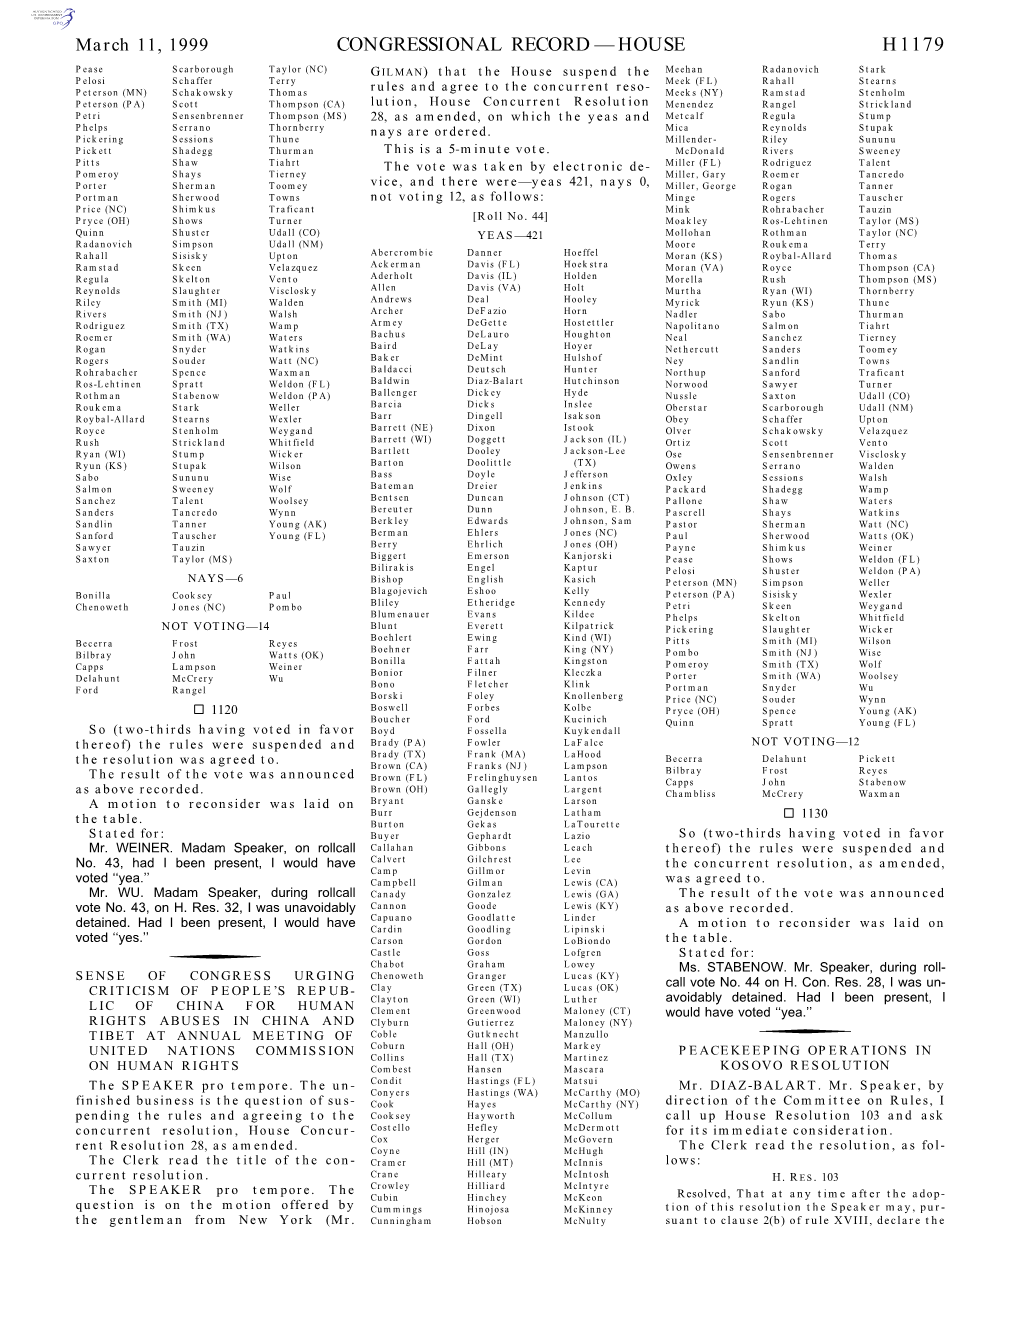 Congressional Record—House H1179